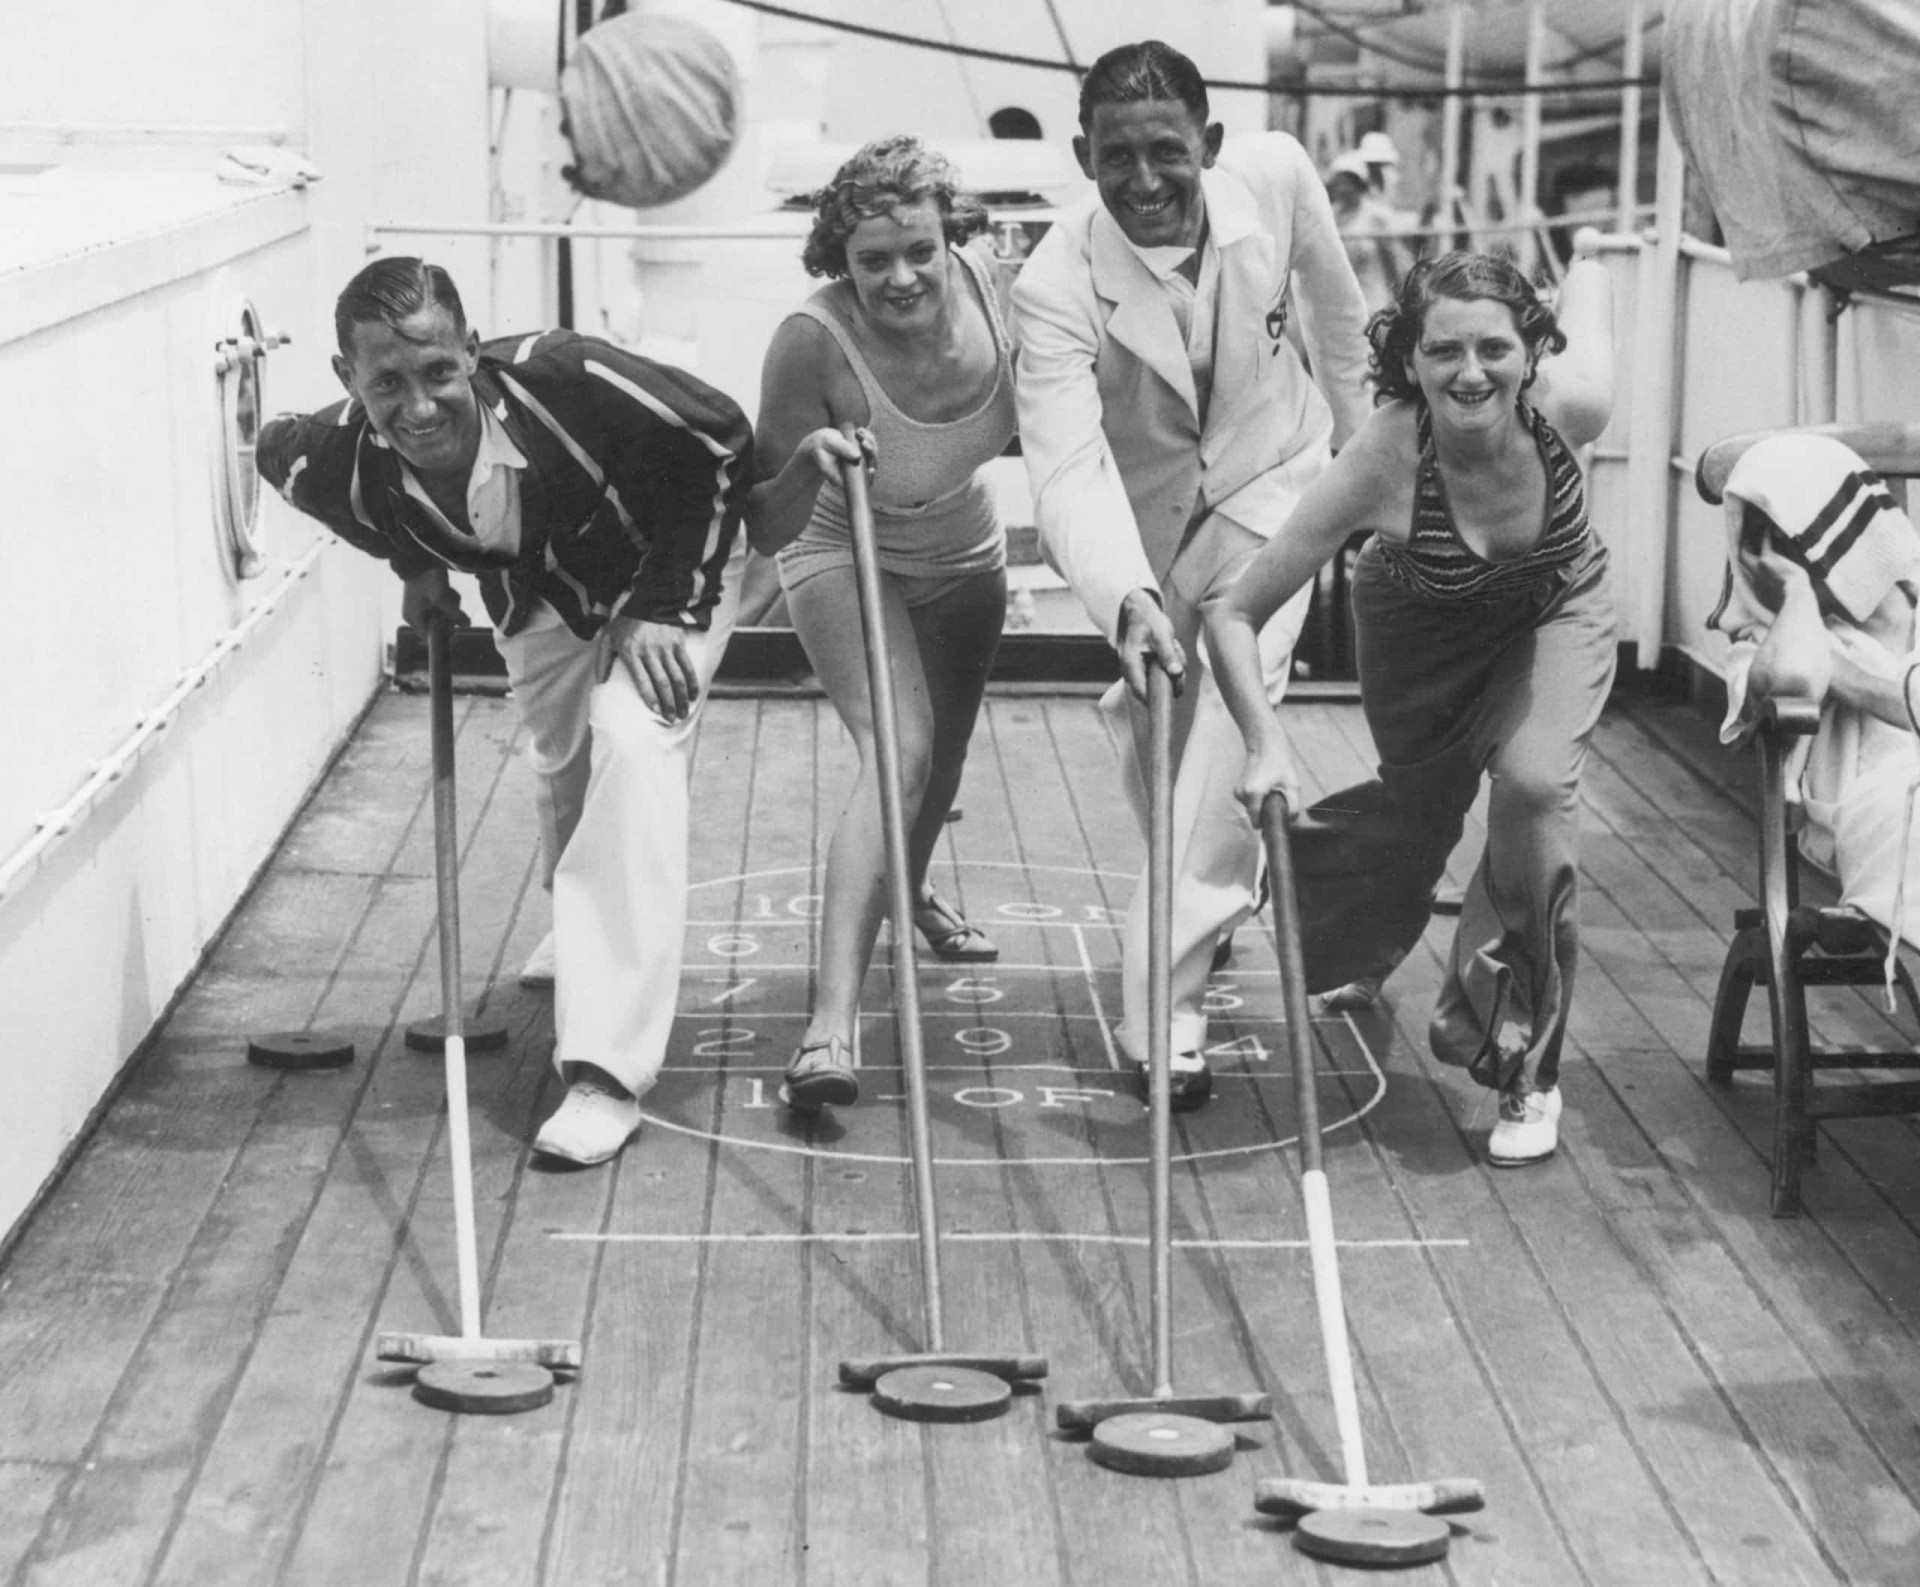 <p>Throughout the 1920s and 1930s, cruise line companies continued to prosper, with destinations more global and defined as "pleasure cruises"—a clear indicator that more and more people were recognizing a cruise as an affordable leisure option.</p>